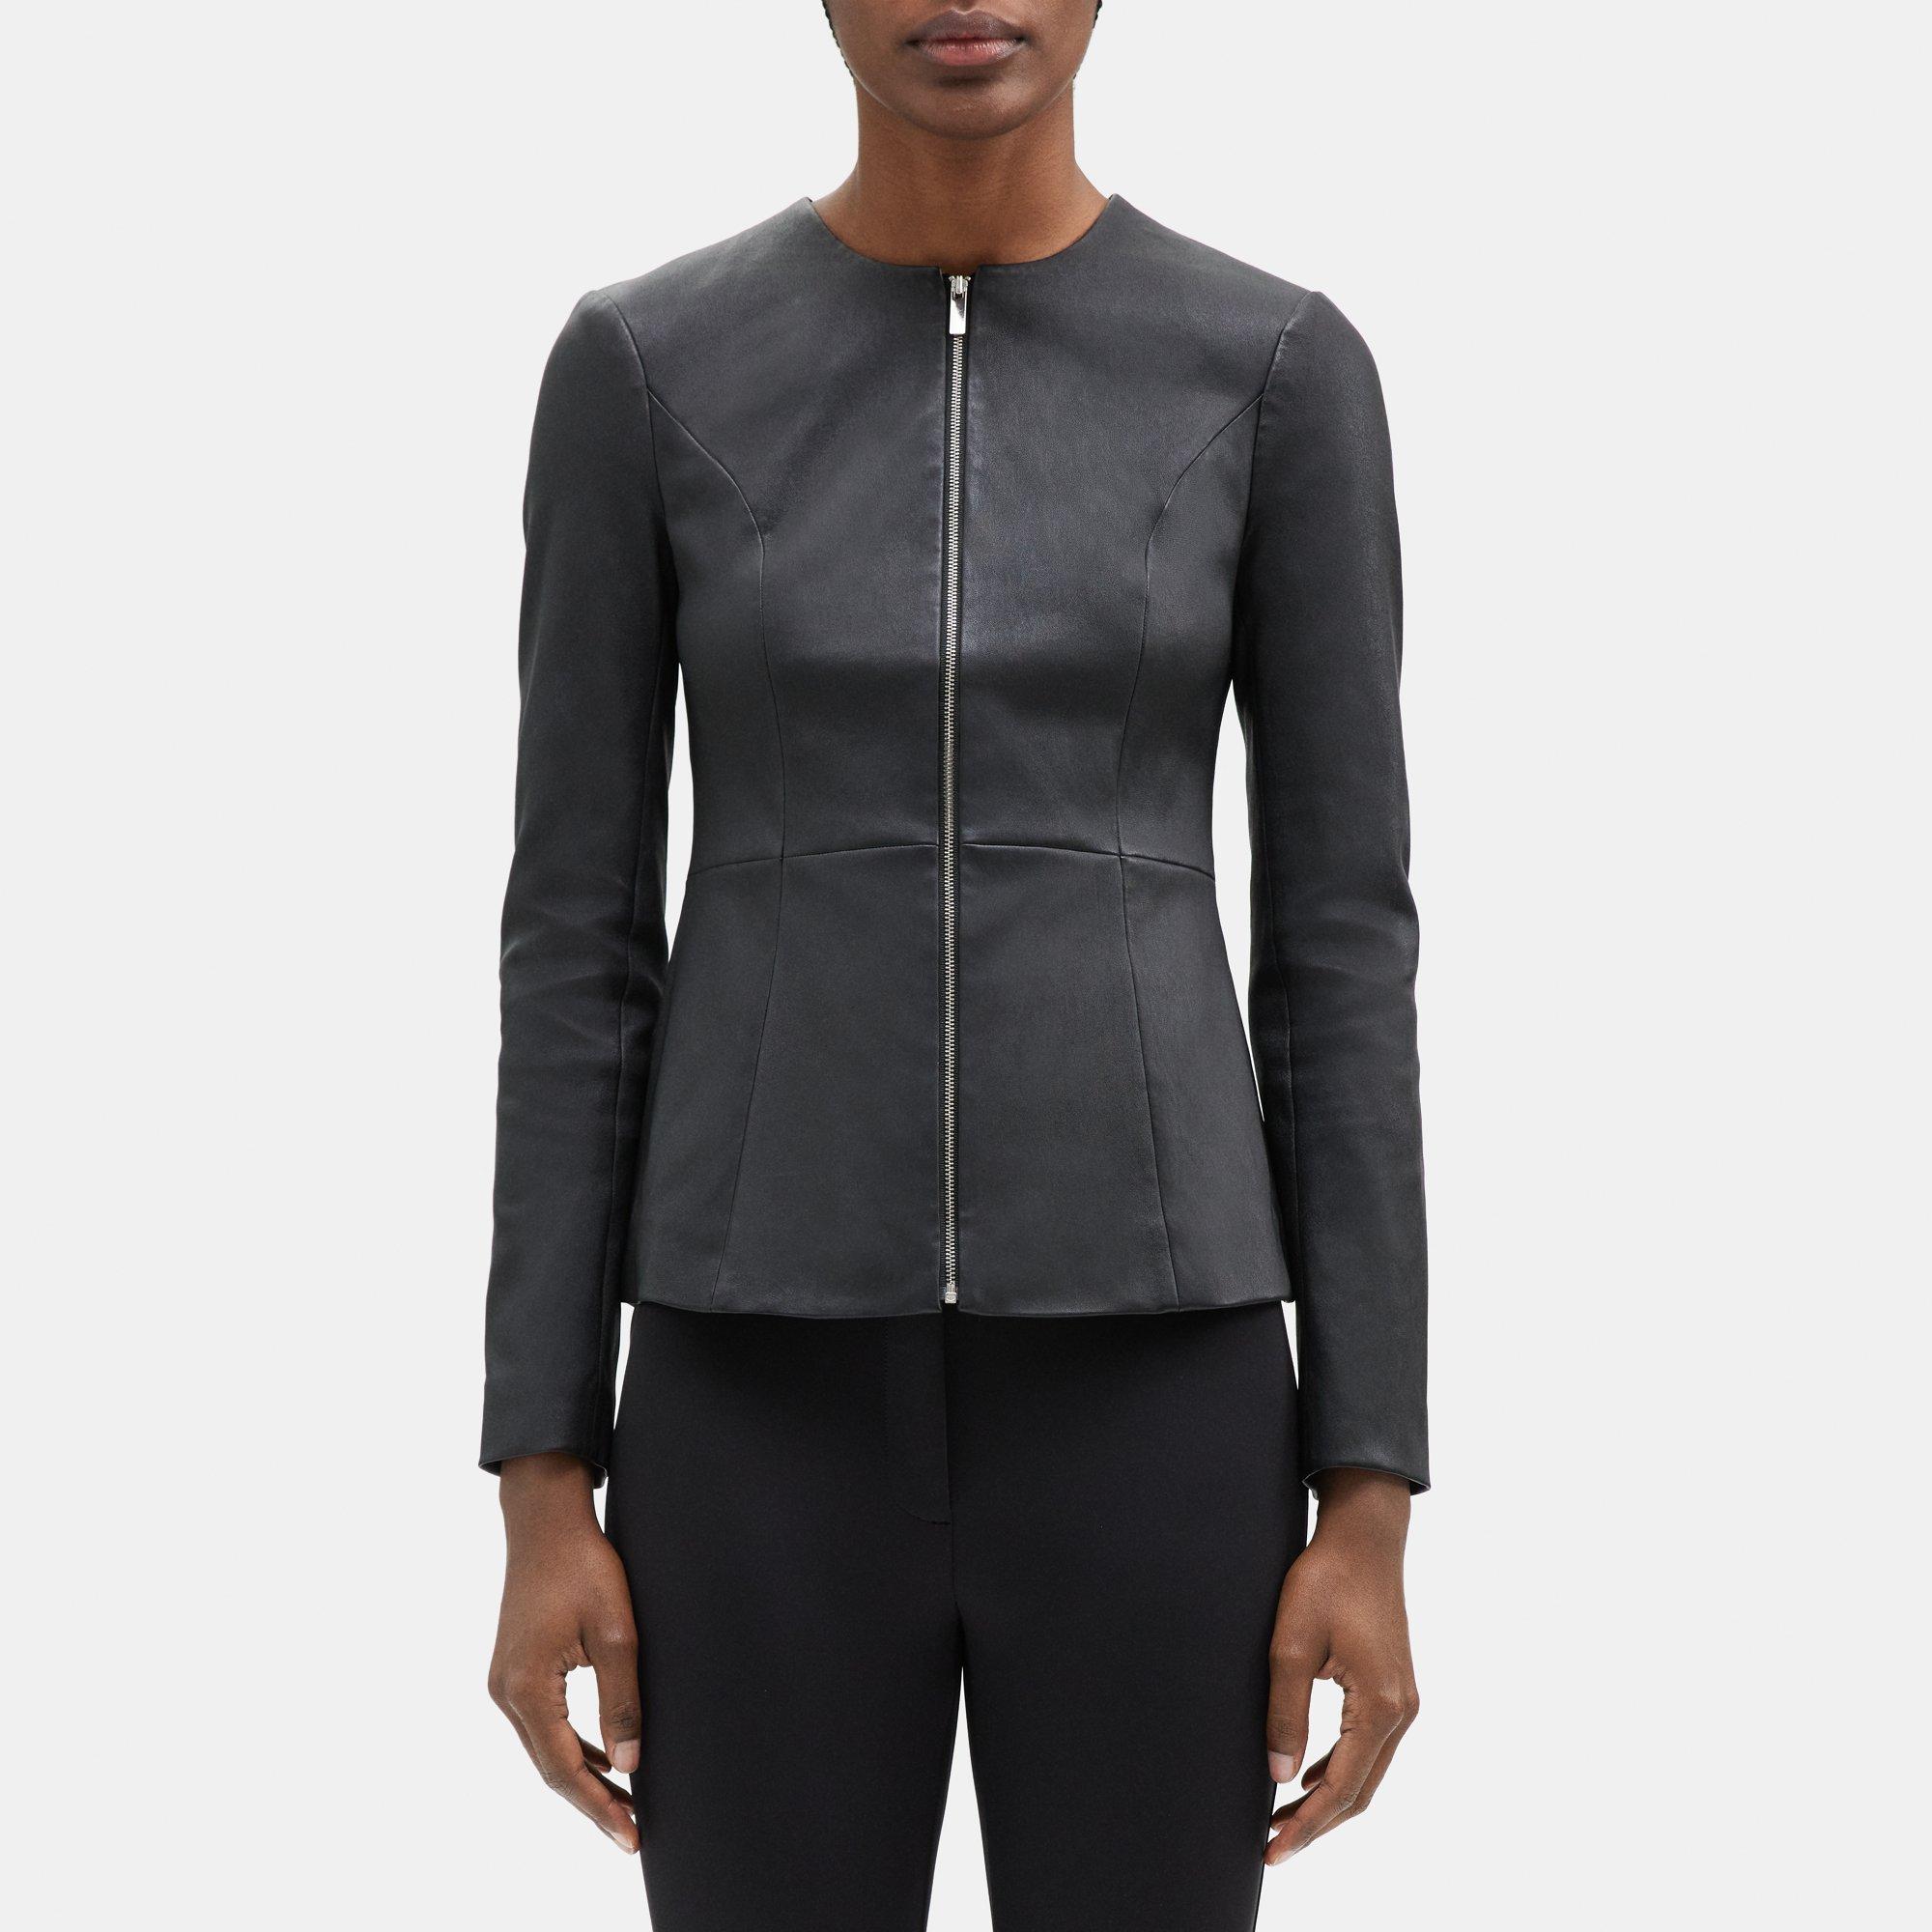 Theory Peplum Jacket in Leather